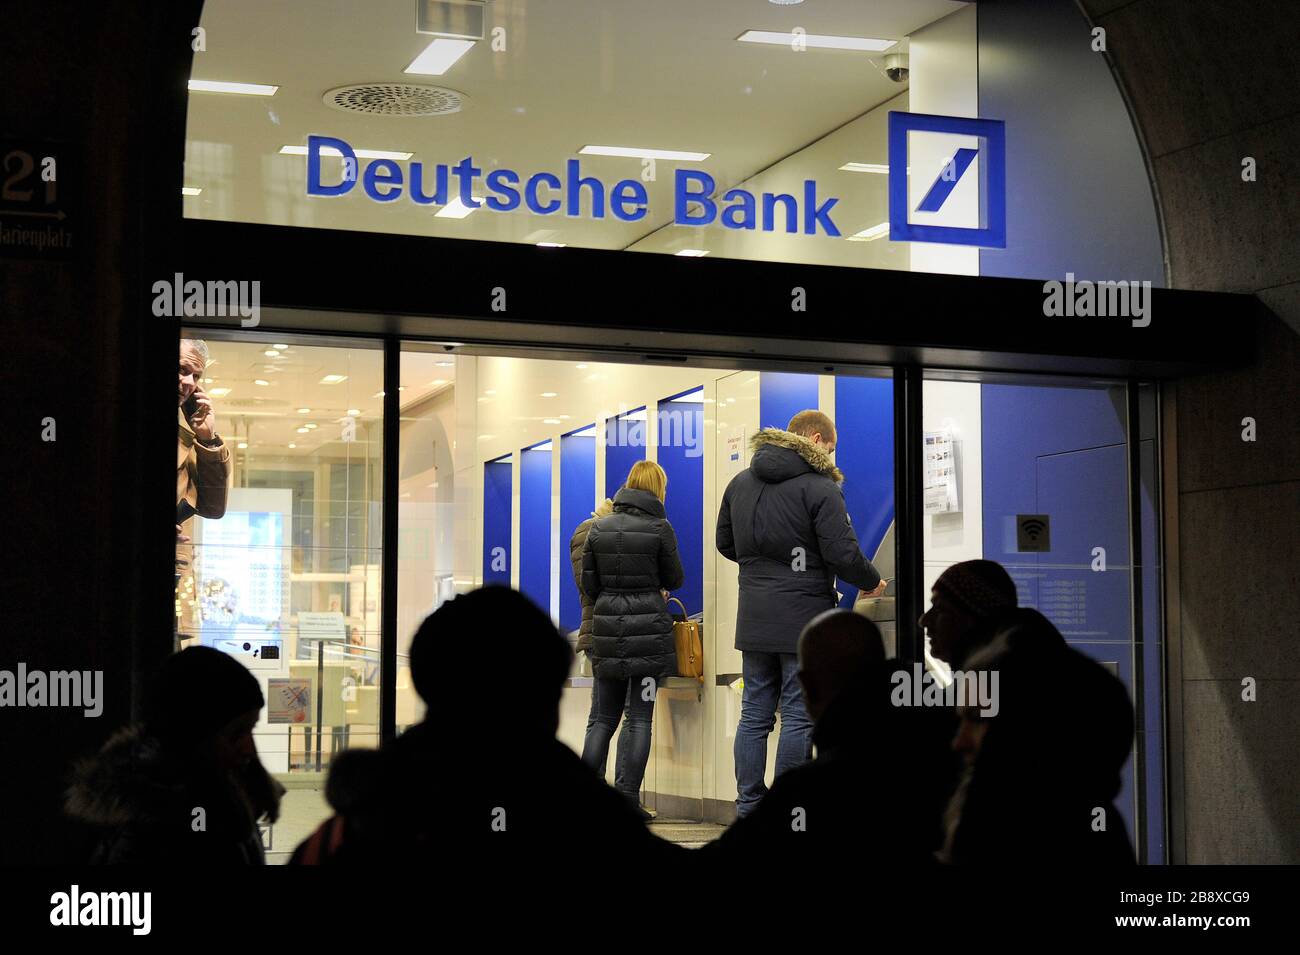 Deutsche Bank Branch High Resolution Stock Photography and Images - Alamy